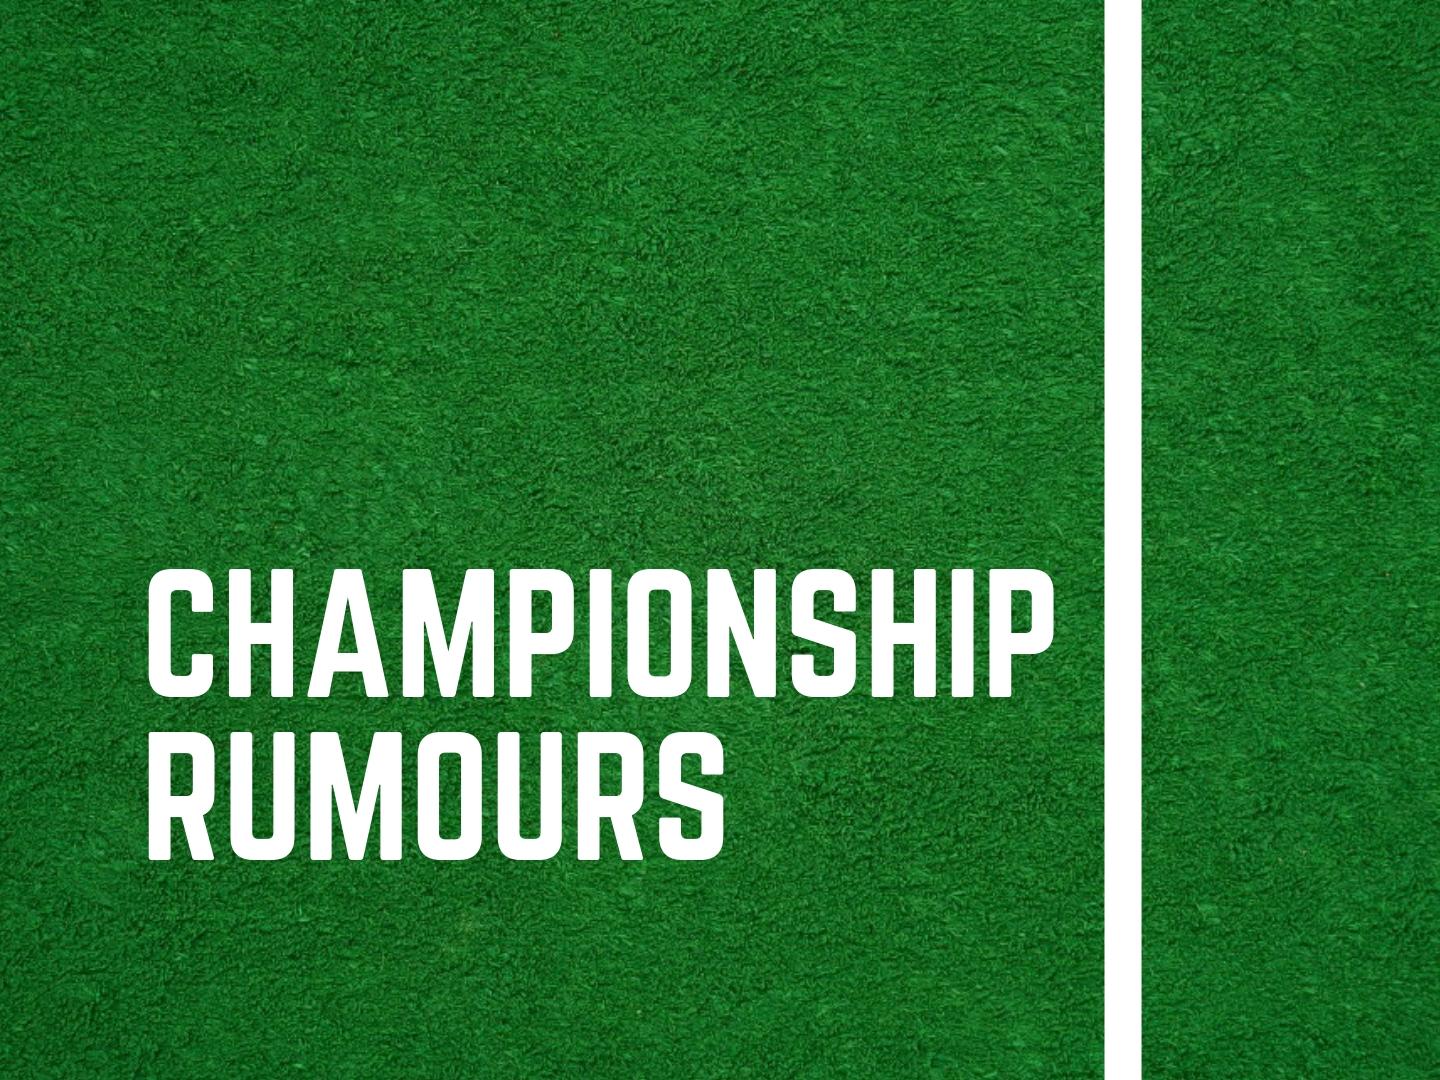 Latest Championship rumours from around the web